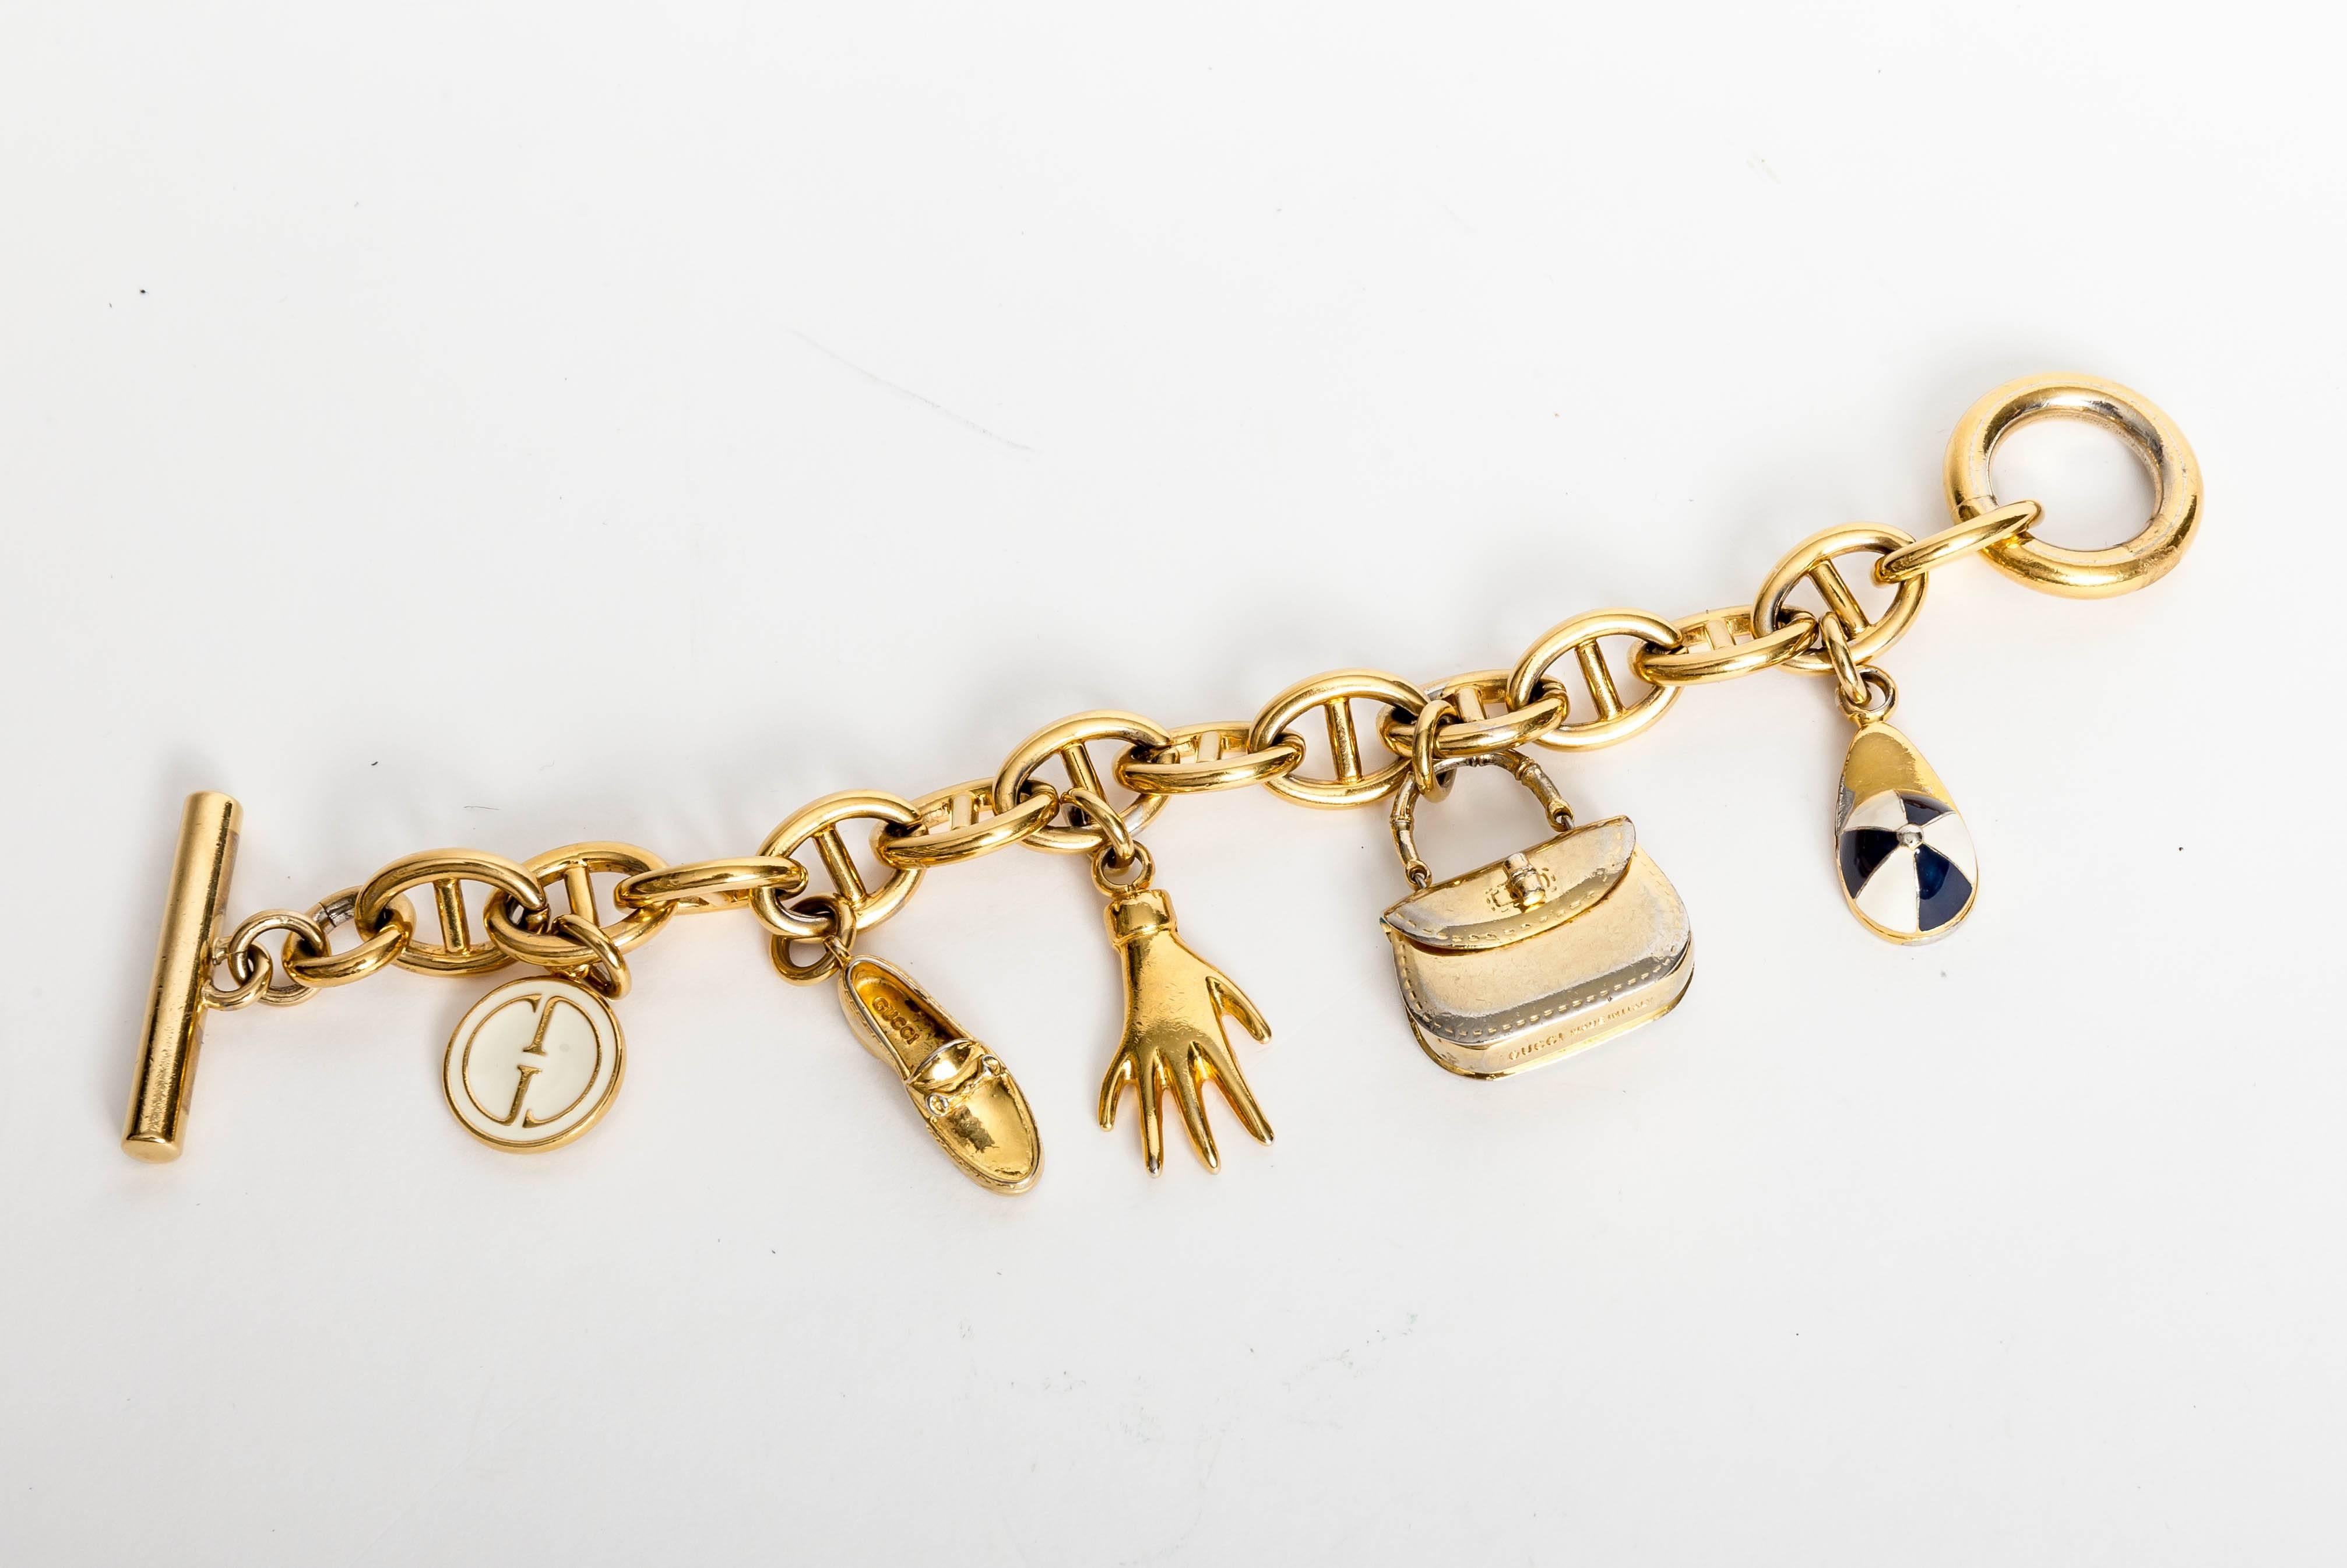 Gucci Charm Bracelet with Toggle Closure